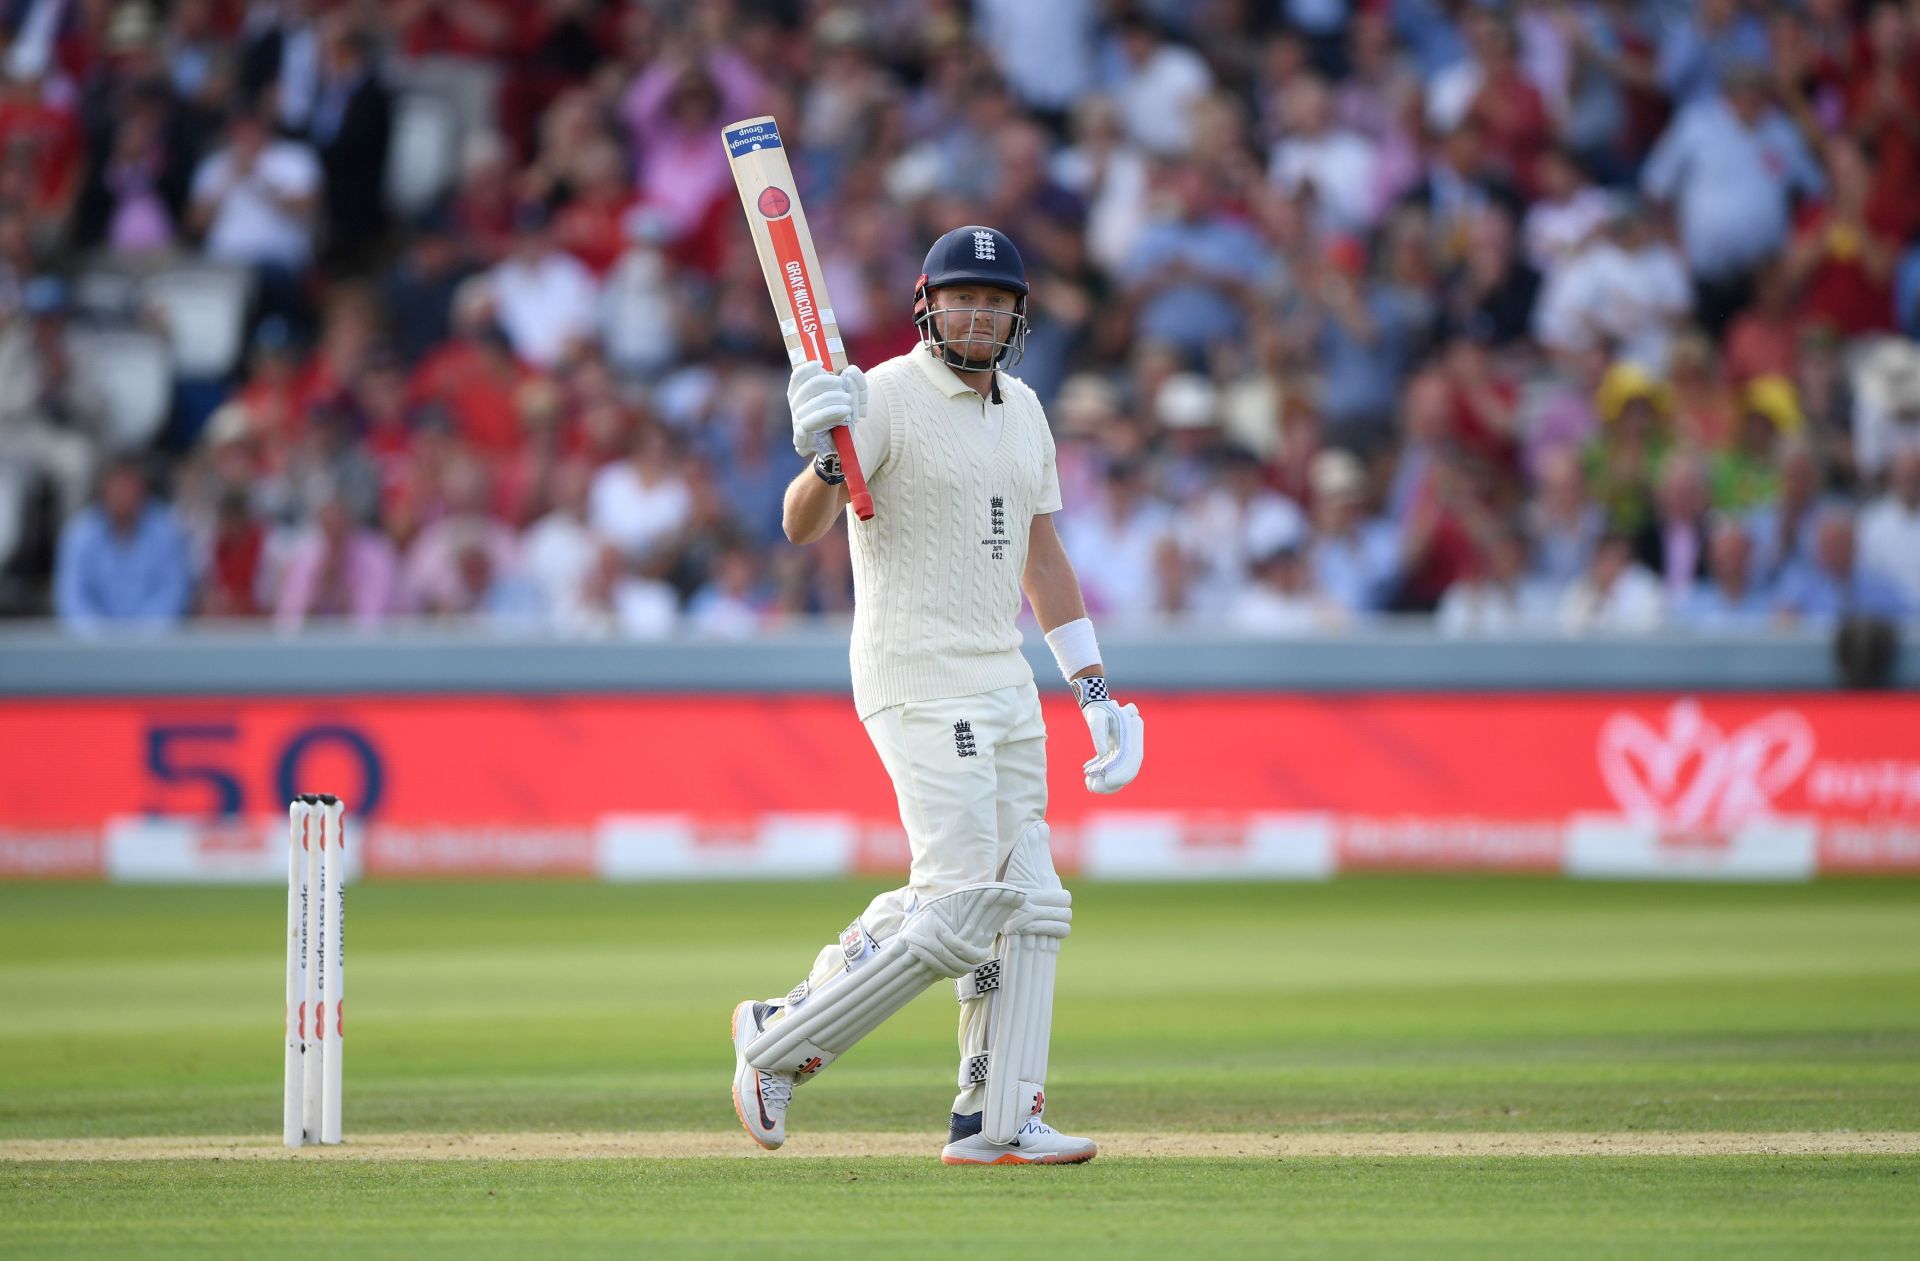 England v Australia - 2nd Specsavers Ashes Test: Day Two